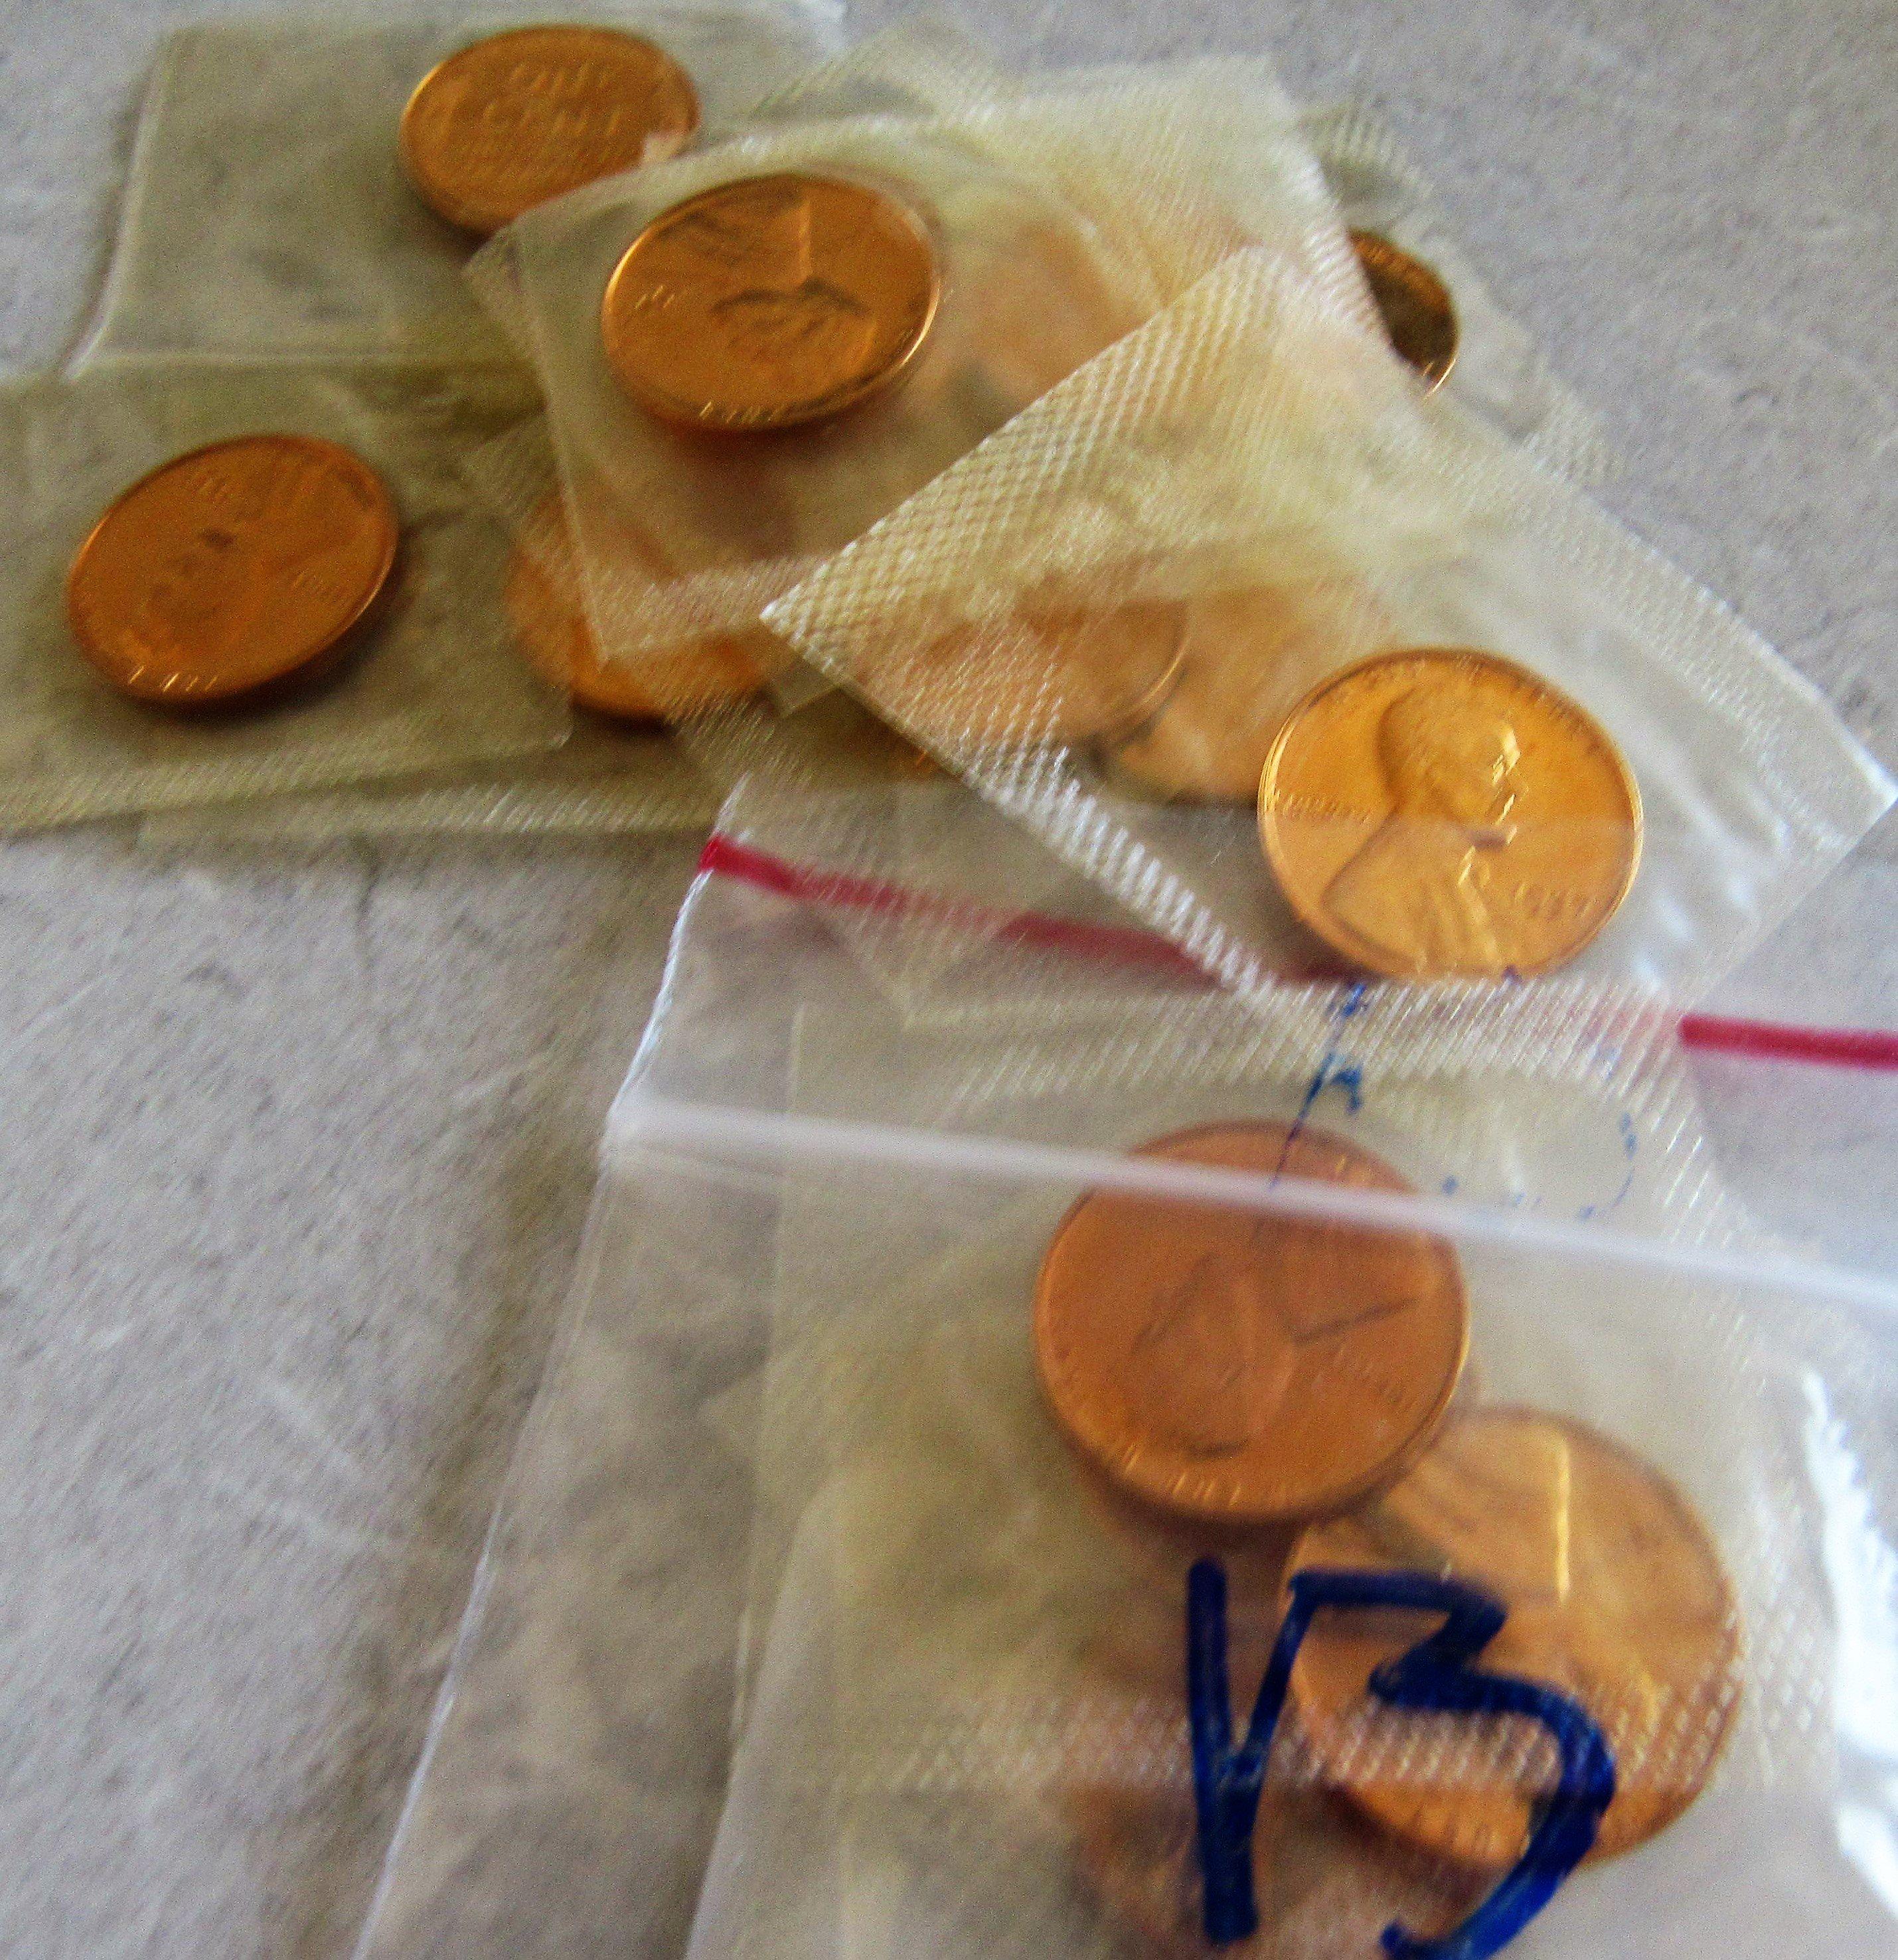 15 PROOF WHEAT PENNIES IN ORIGINAL CELLOPHANE FROM PROOF SETS